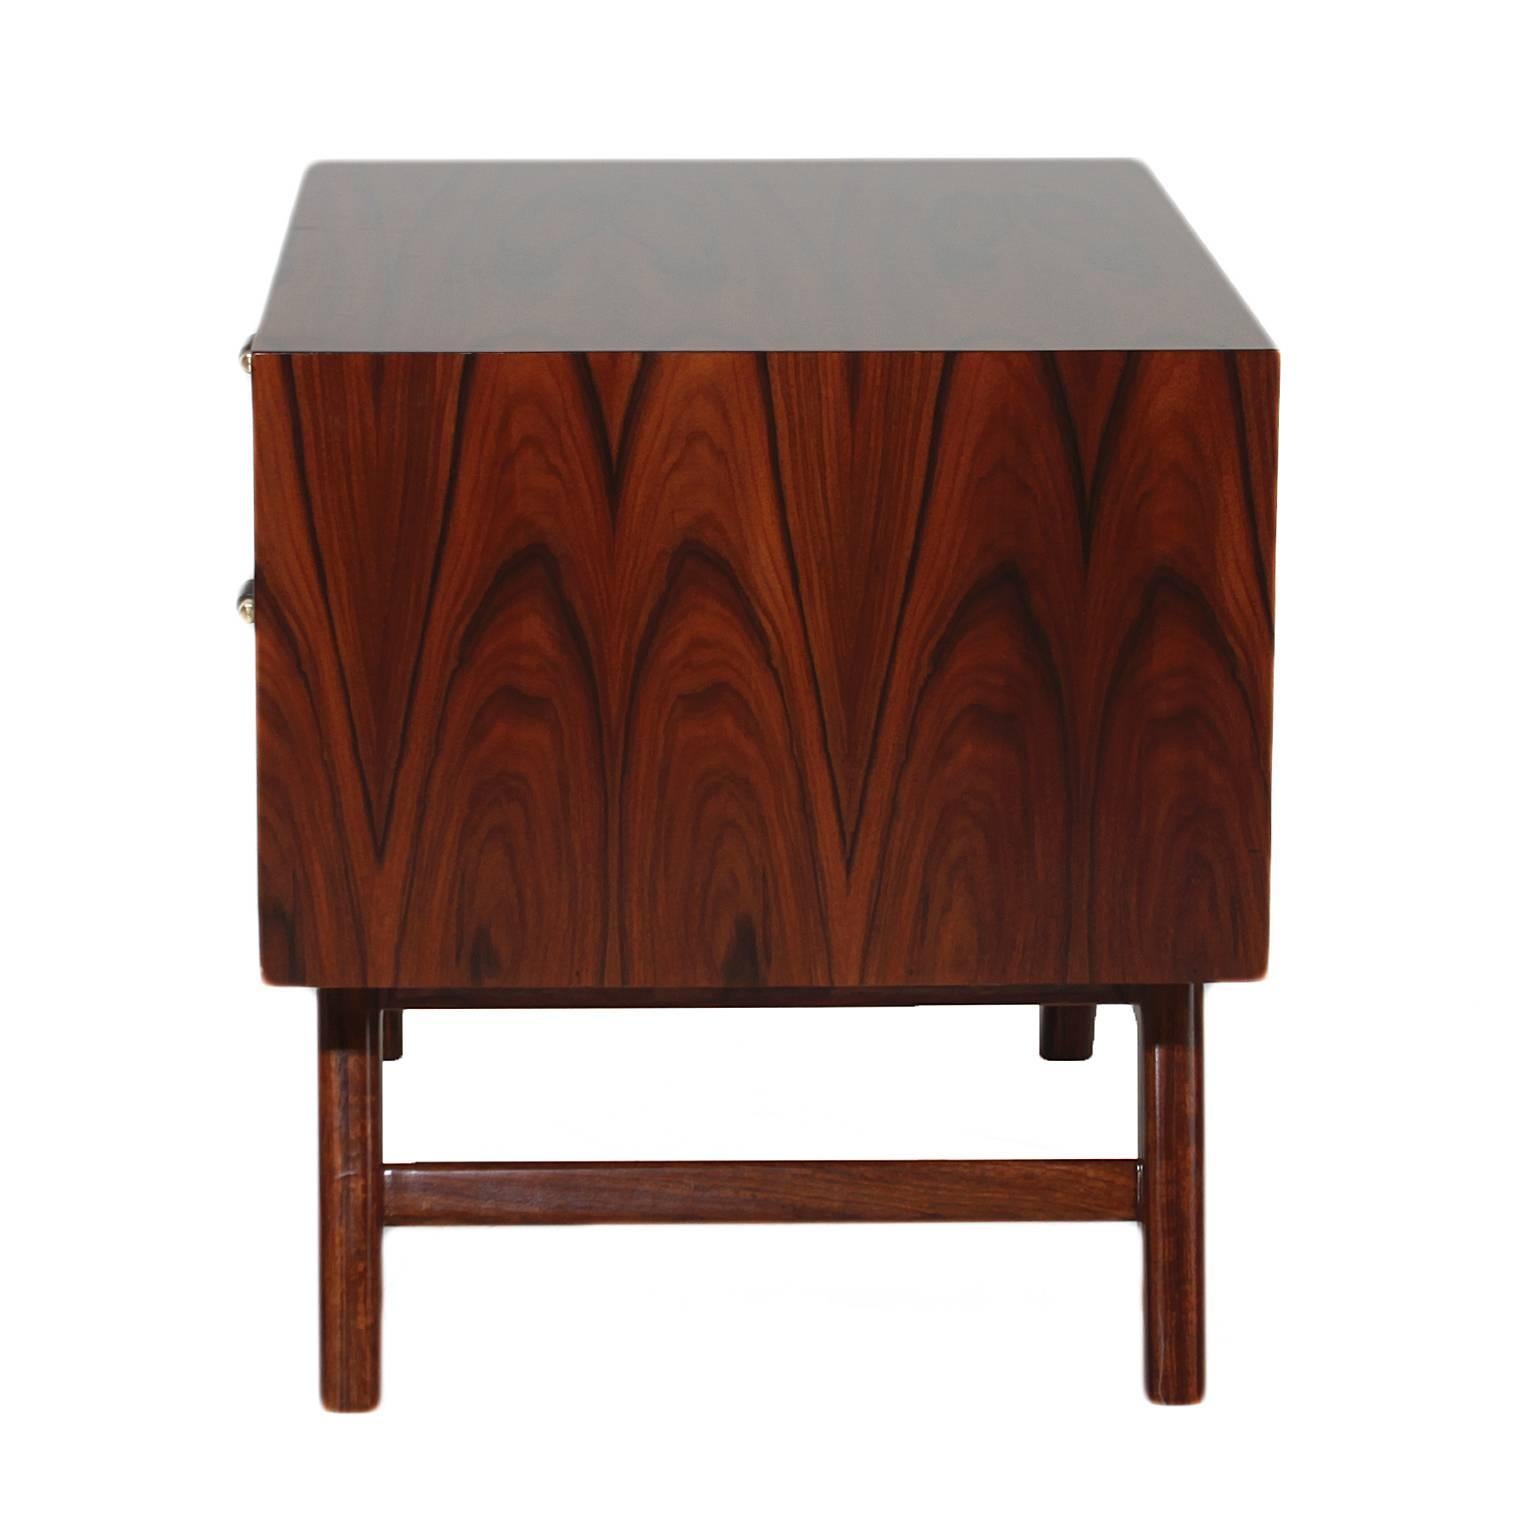 Mid-20th Century Pair of Rosewood Side Tables with Pierced Pulls by Thomas Hayes Studio